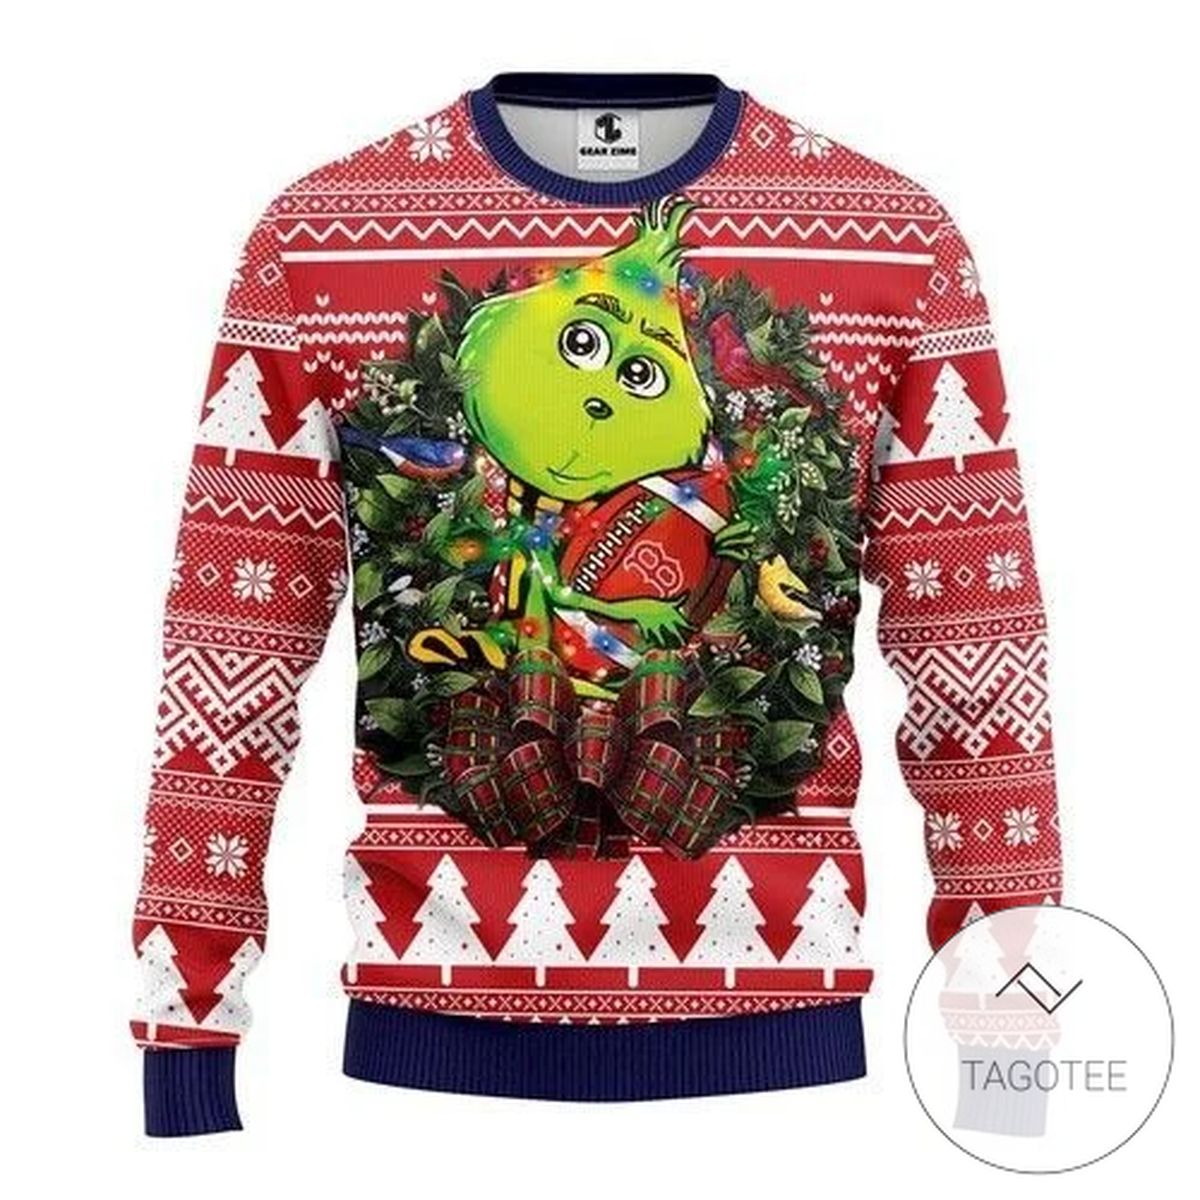 Mlb Boston Red Sox Grateful Dead Christmas Ugly Sweater